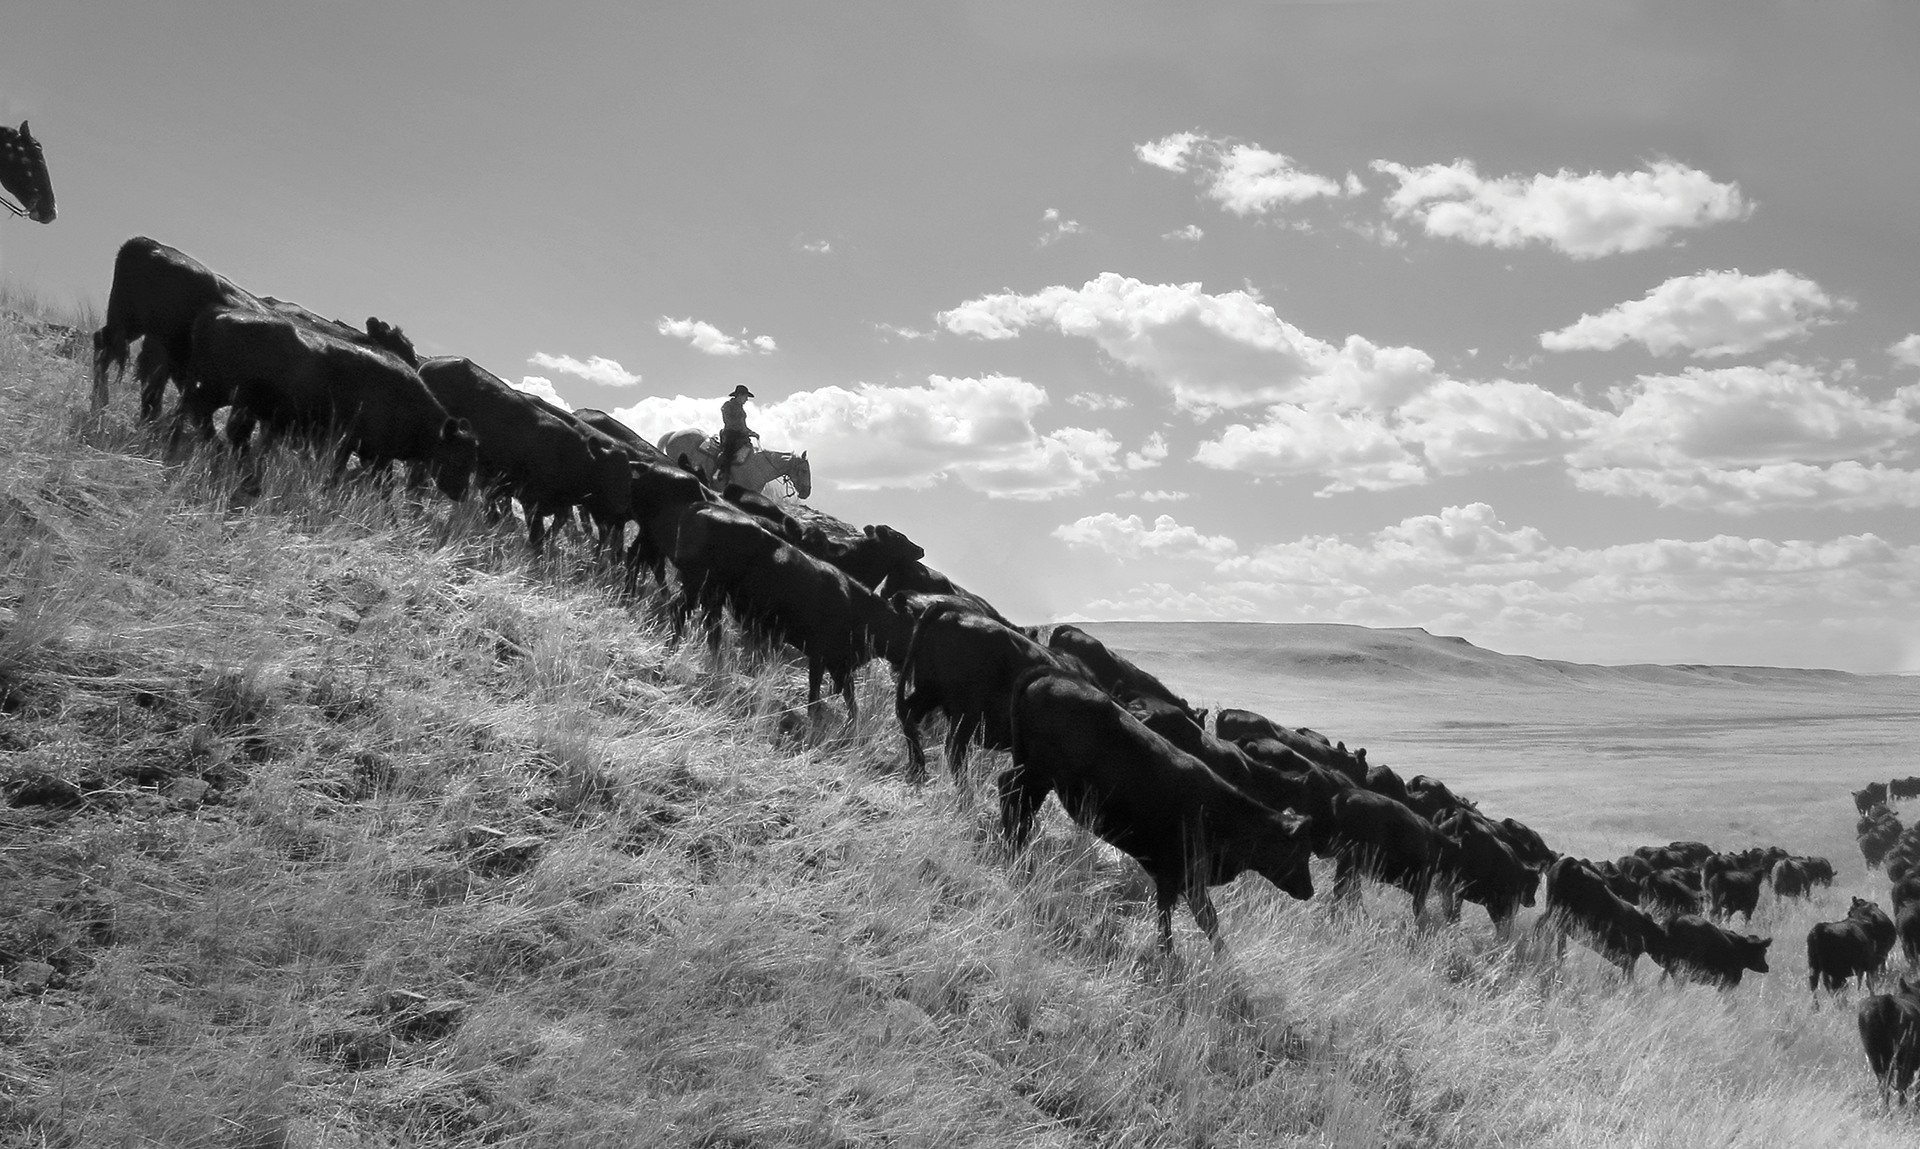 A herd of black cows walks down a sloping field of grass. A cowboy on a horse rides next to them in the background.